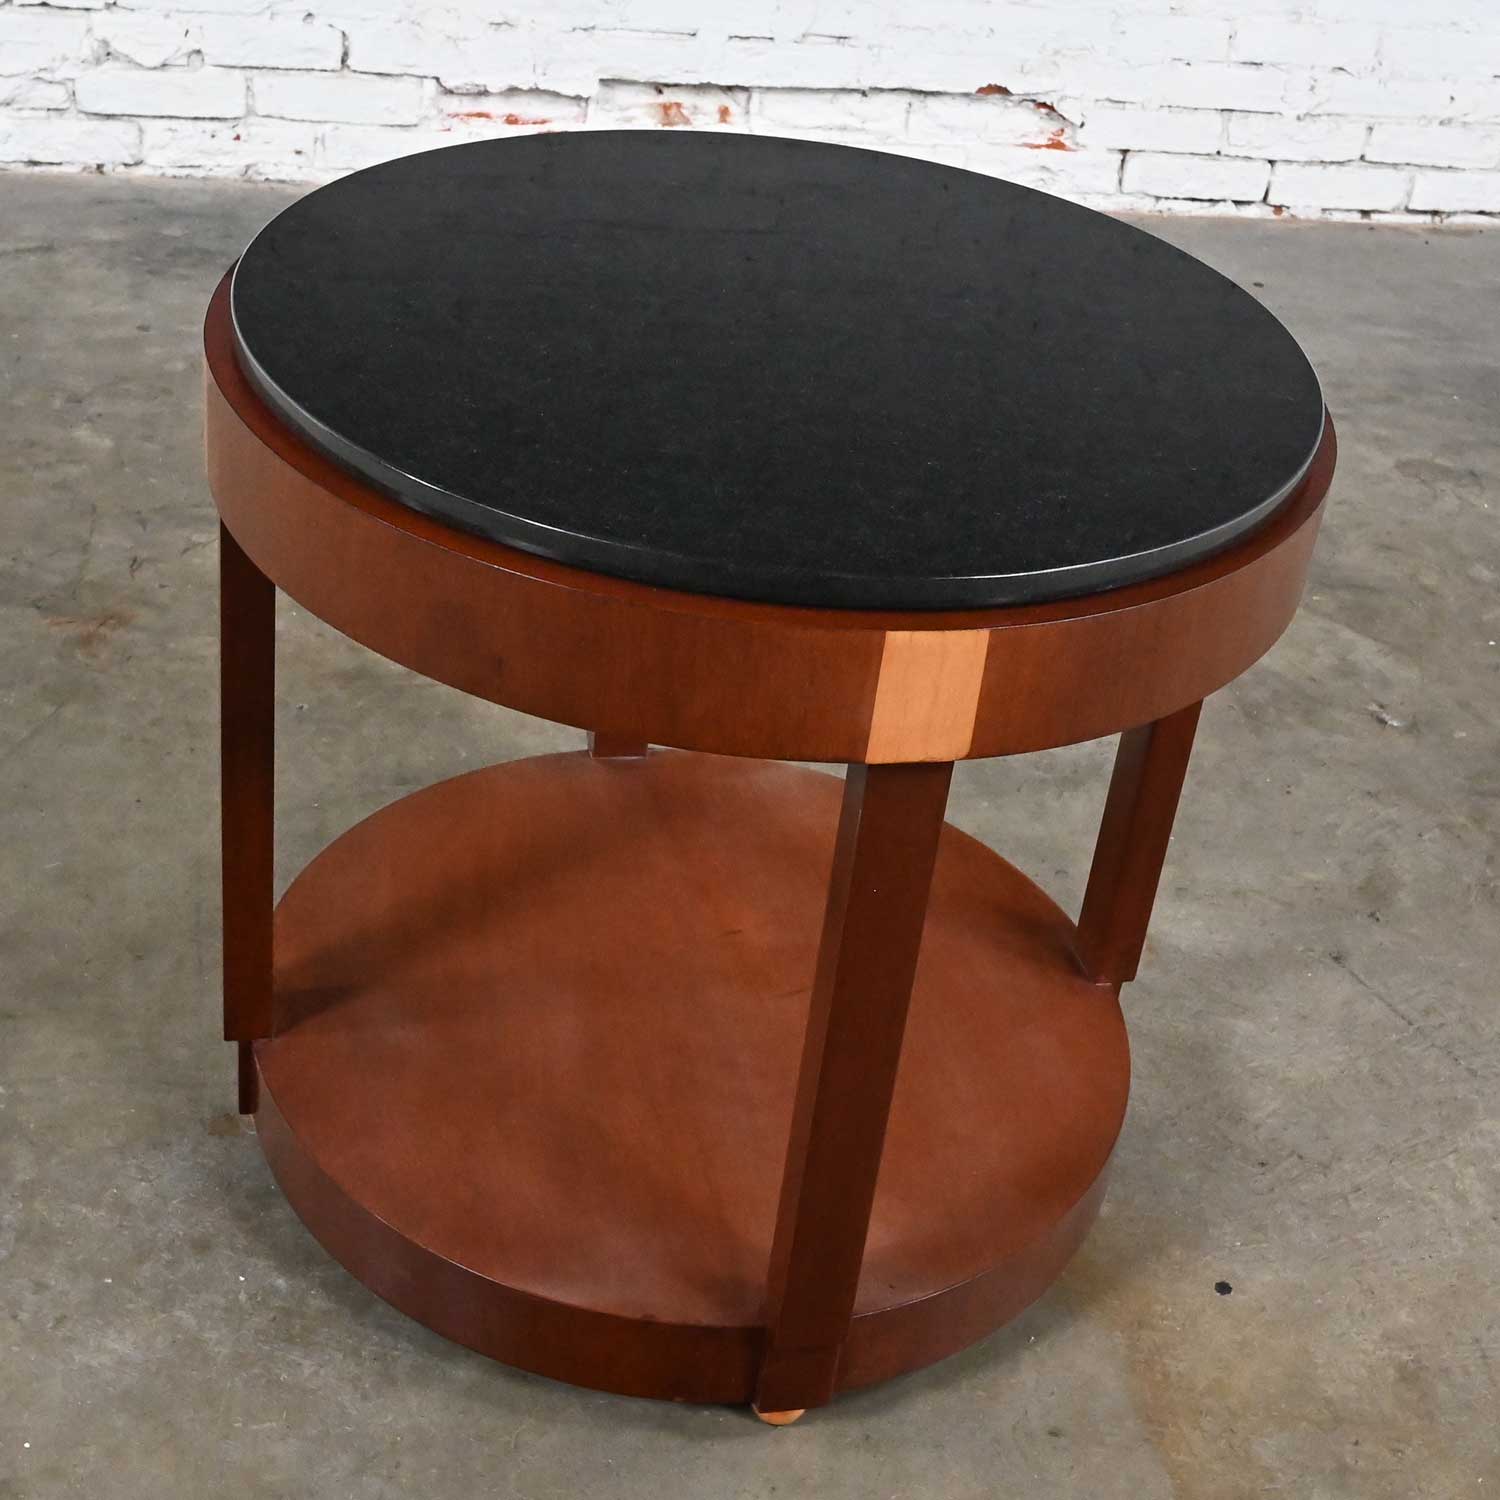 Late 20th Century Art Deco Revival Custom Designed Two Toned Mahogany Round Side Table with Black Granite Top